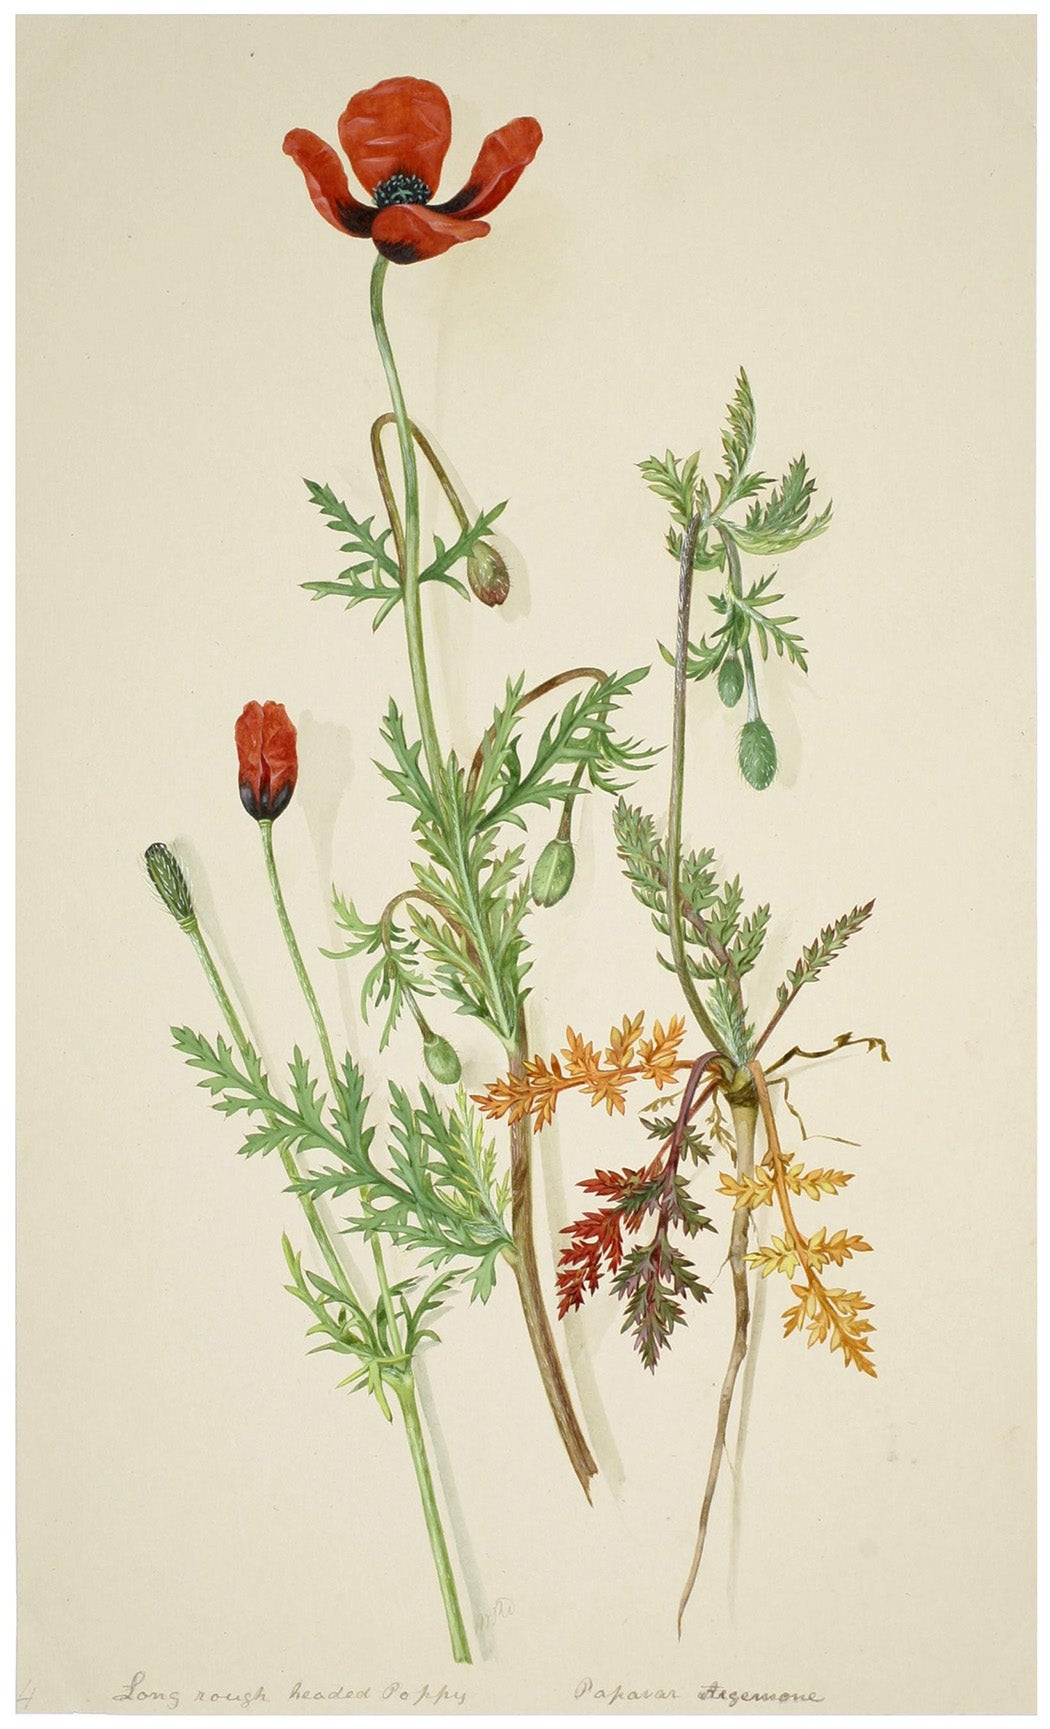 Victorian Botanical Paintings - JSTOR Daily